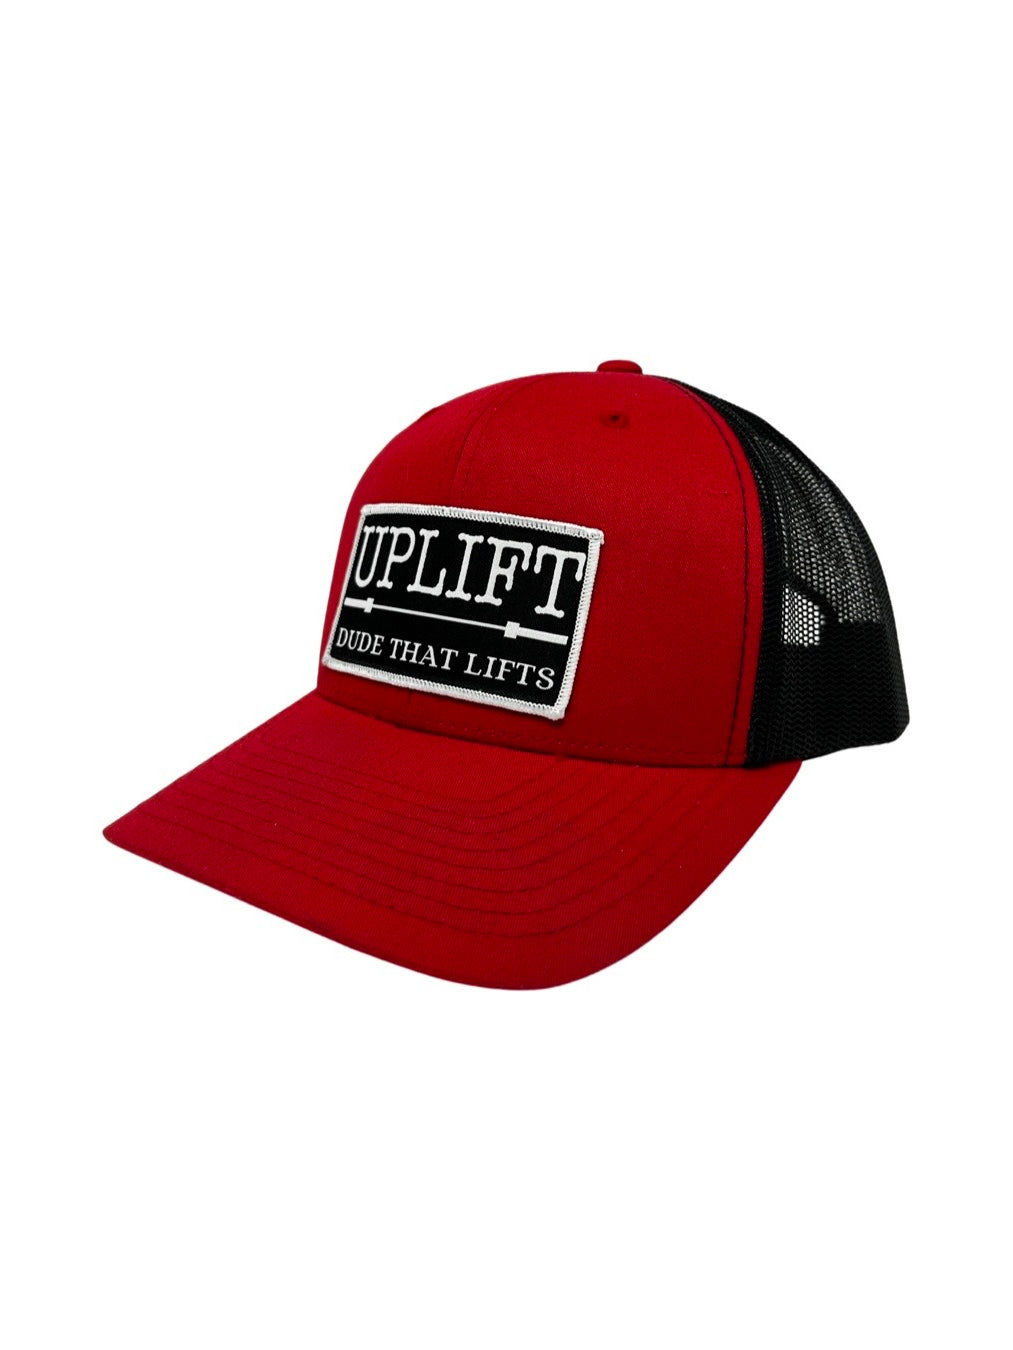 UPLIFT - Red and Black Hat - Dude That Lifts